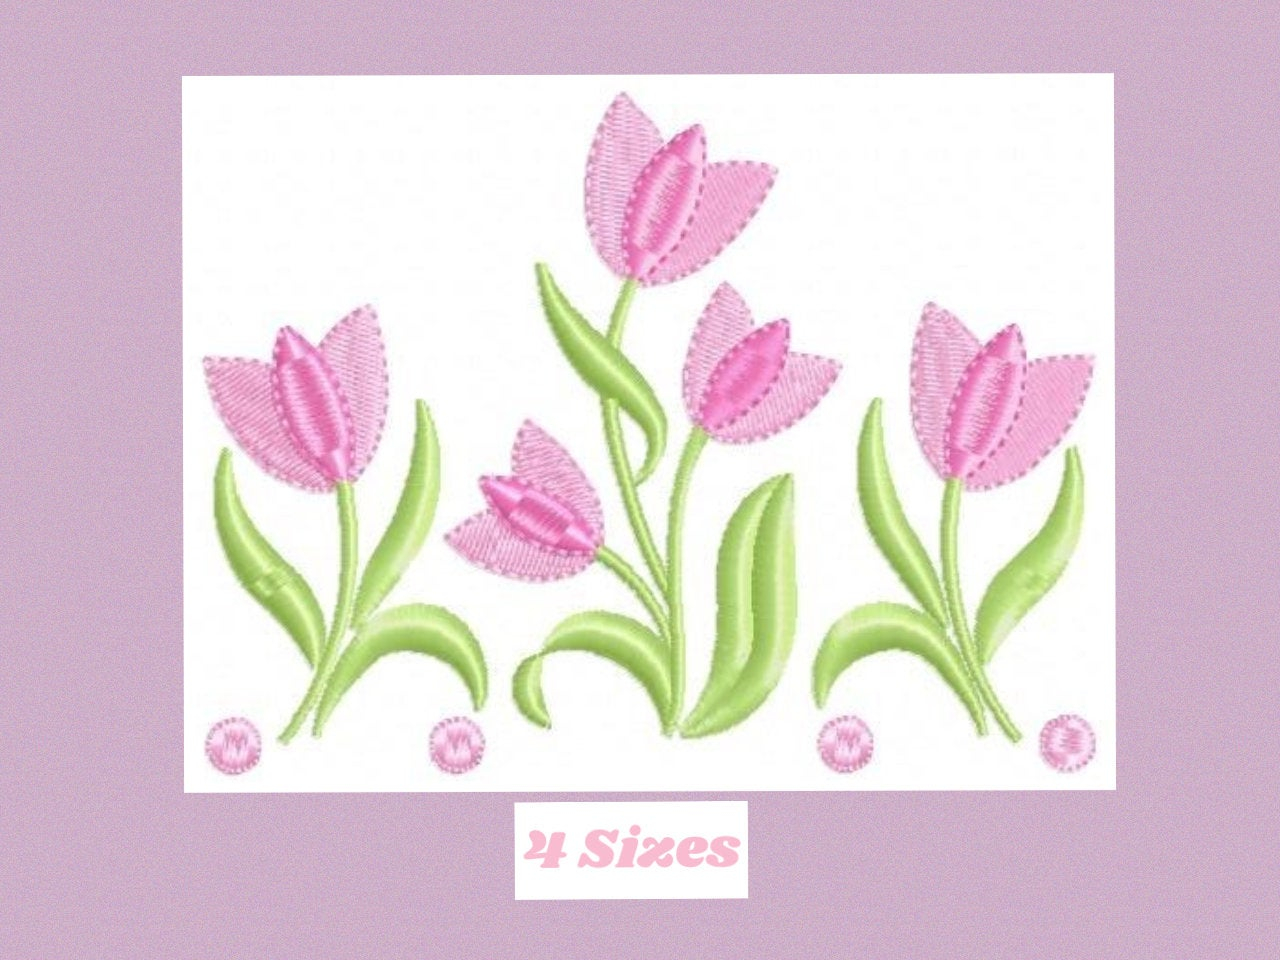 Embroidery Patterns Flowers Flowers Embroidery Designs Flower Embroidery Design Machine Embroidery Pattern Rose Embroidery File Flower Applique Roses Tulips Embroidery